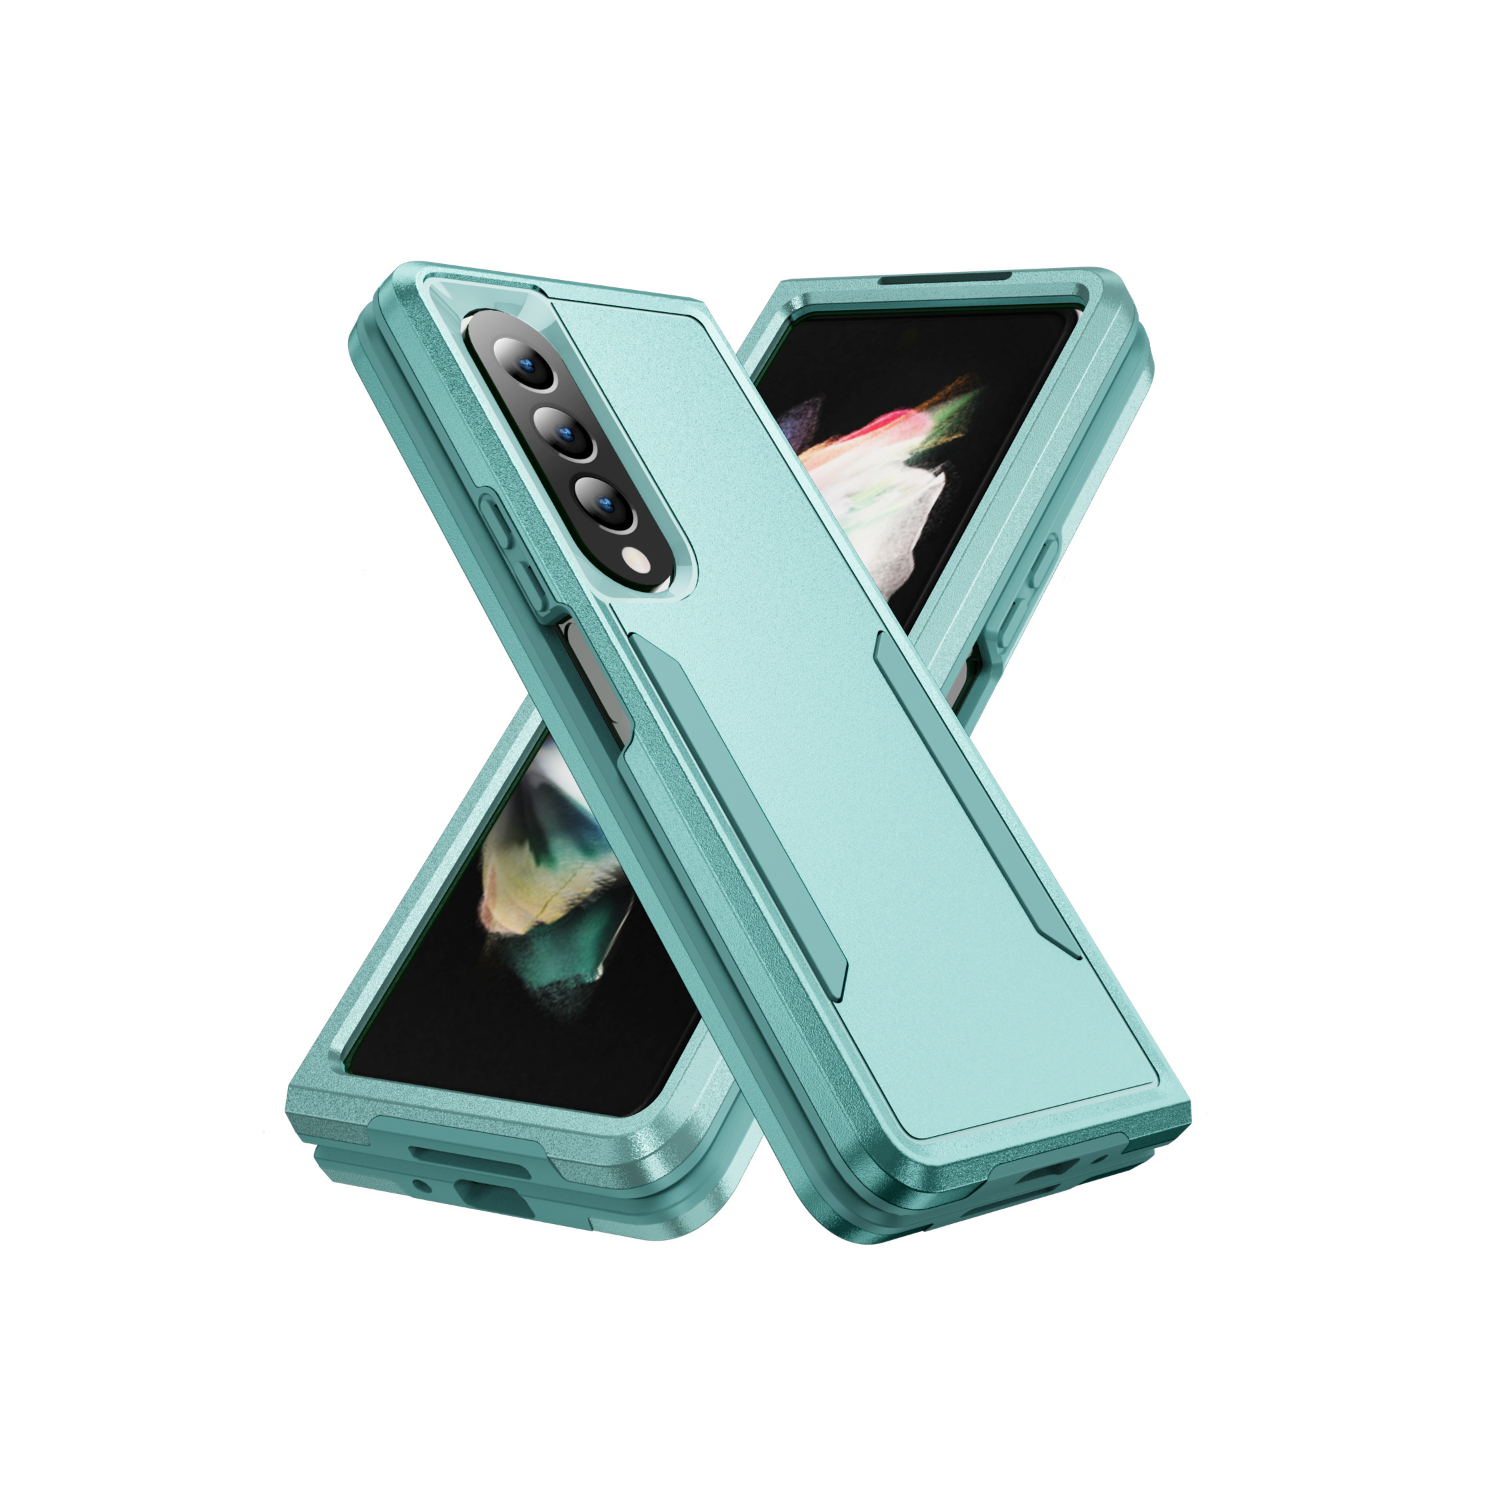 【CSmart】 Dual Layers Heavy Duty Rubber Armor Bumper Hard Case Cover for Samsung Galaxy Z Fold 4 5G, Teal